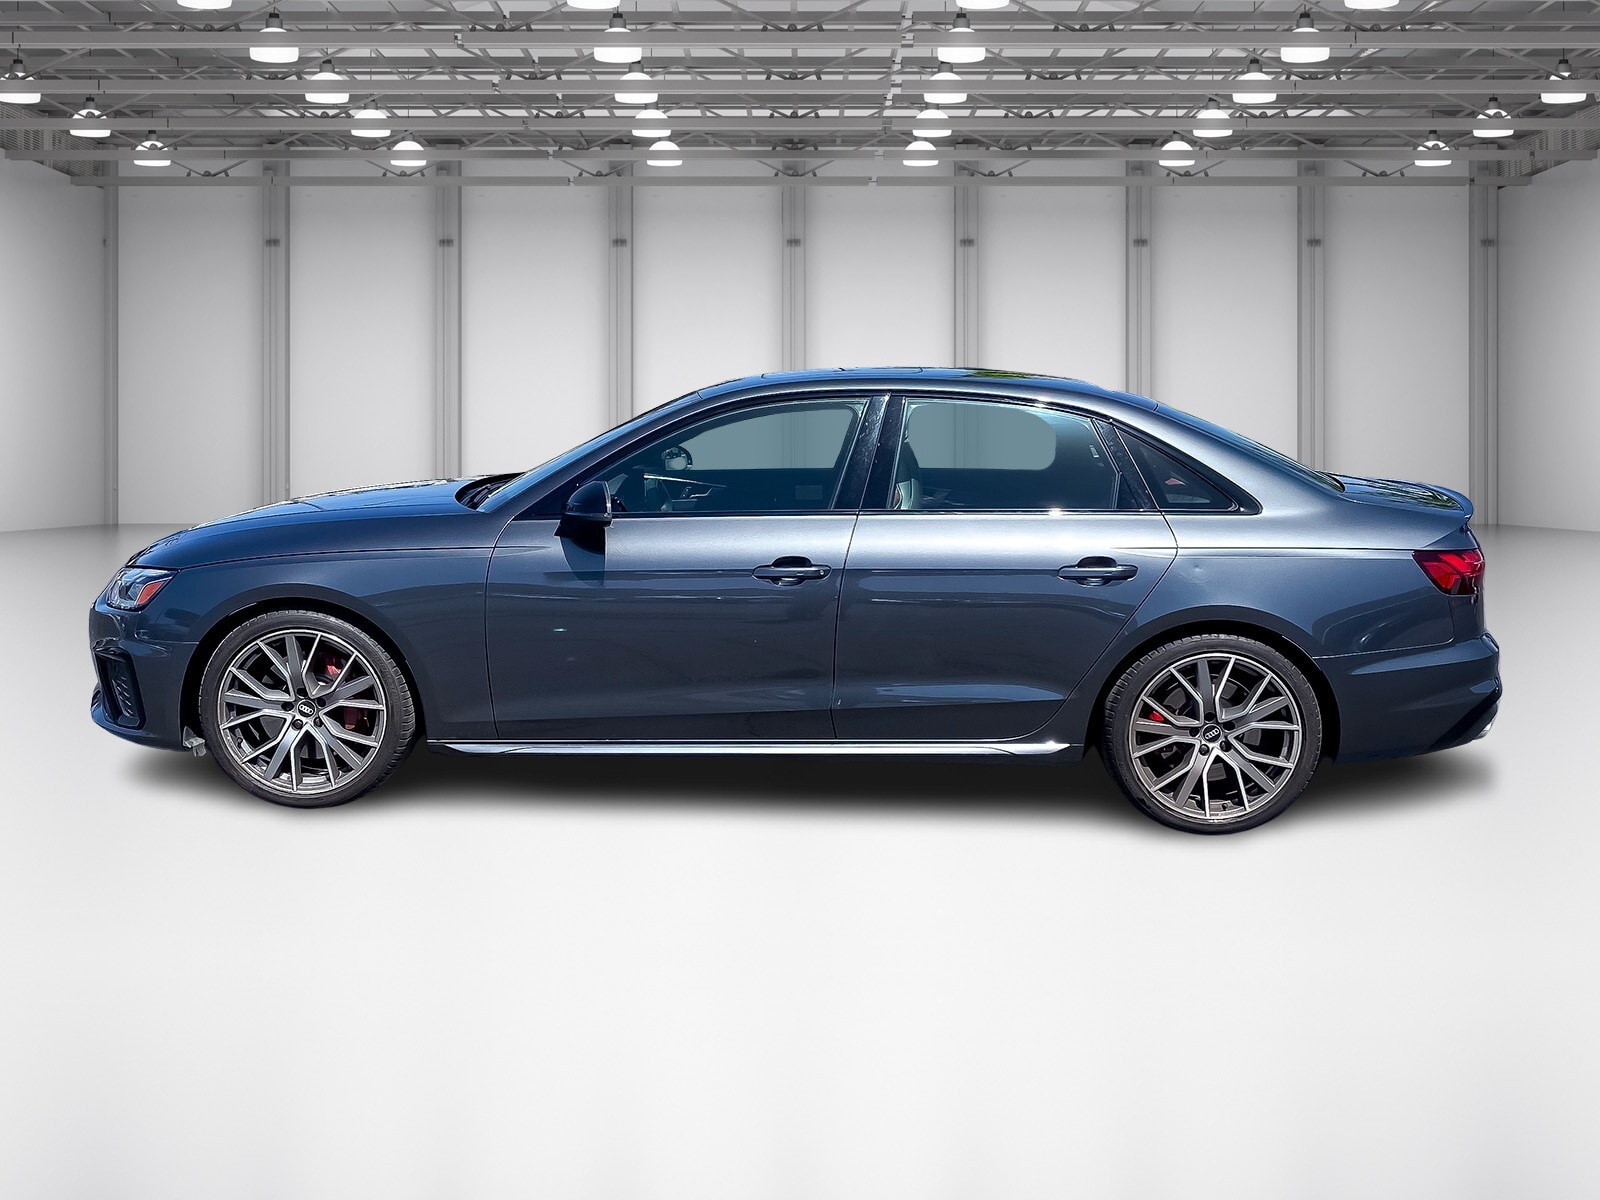 Used 2021 Audi S4 Premium Plus with VIN WAUB4AF4XMA031380 for sale in Reno, NV